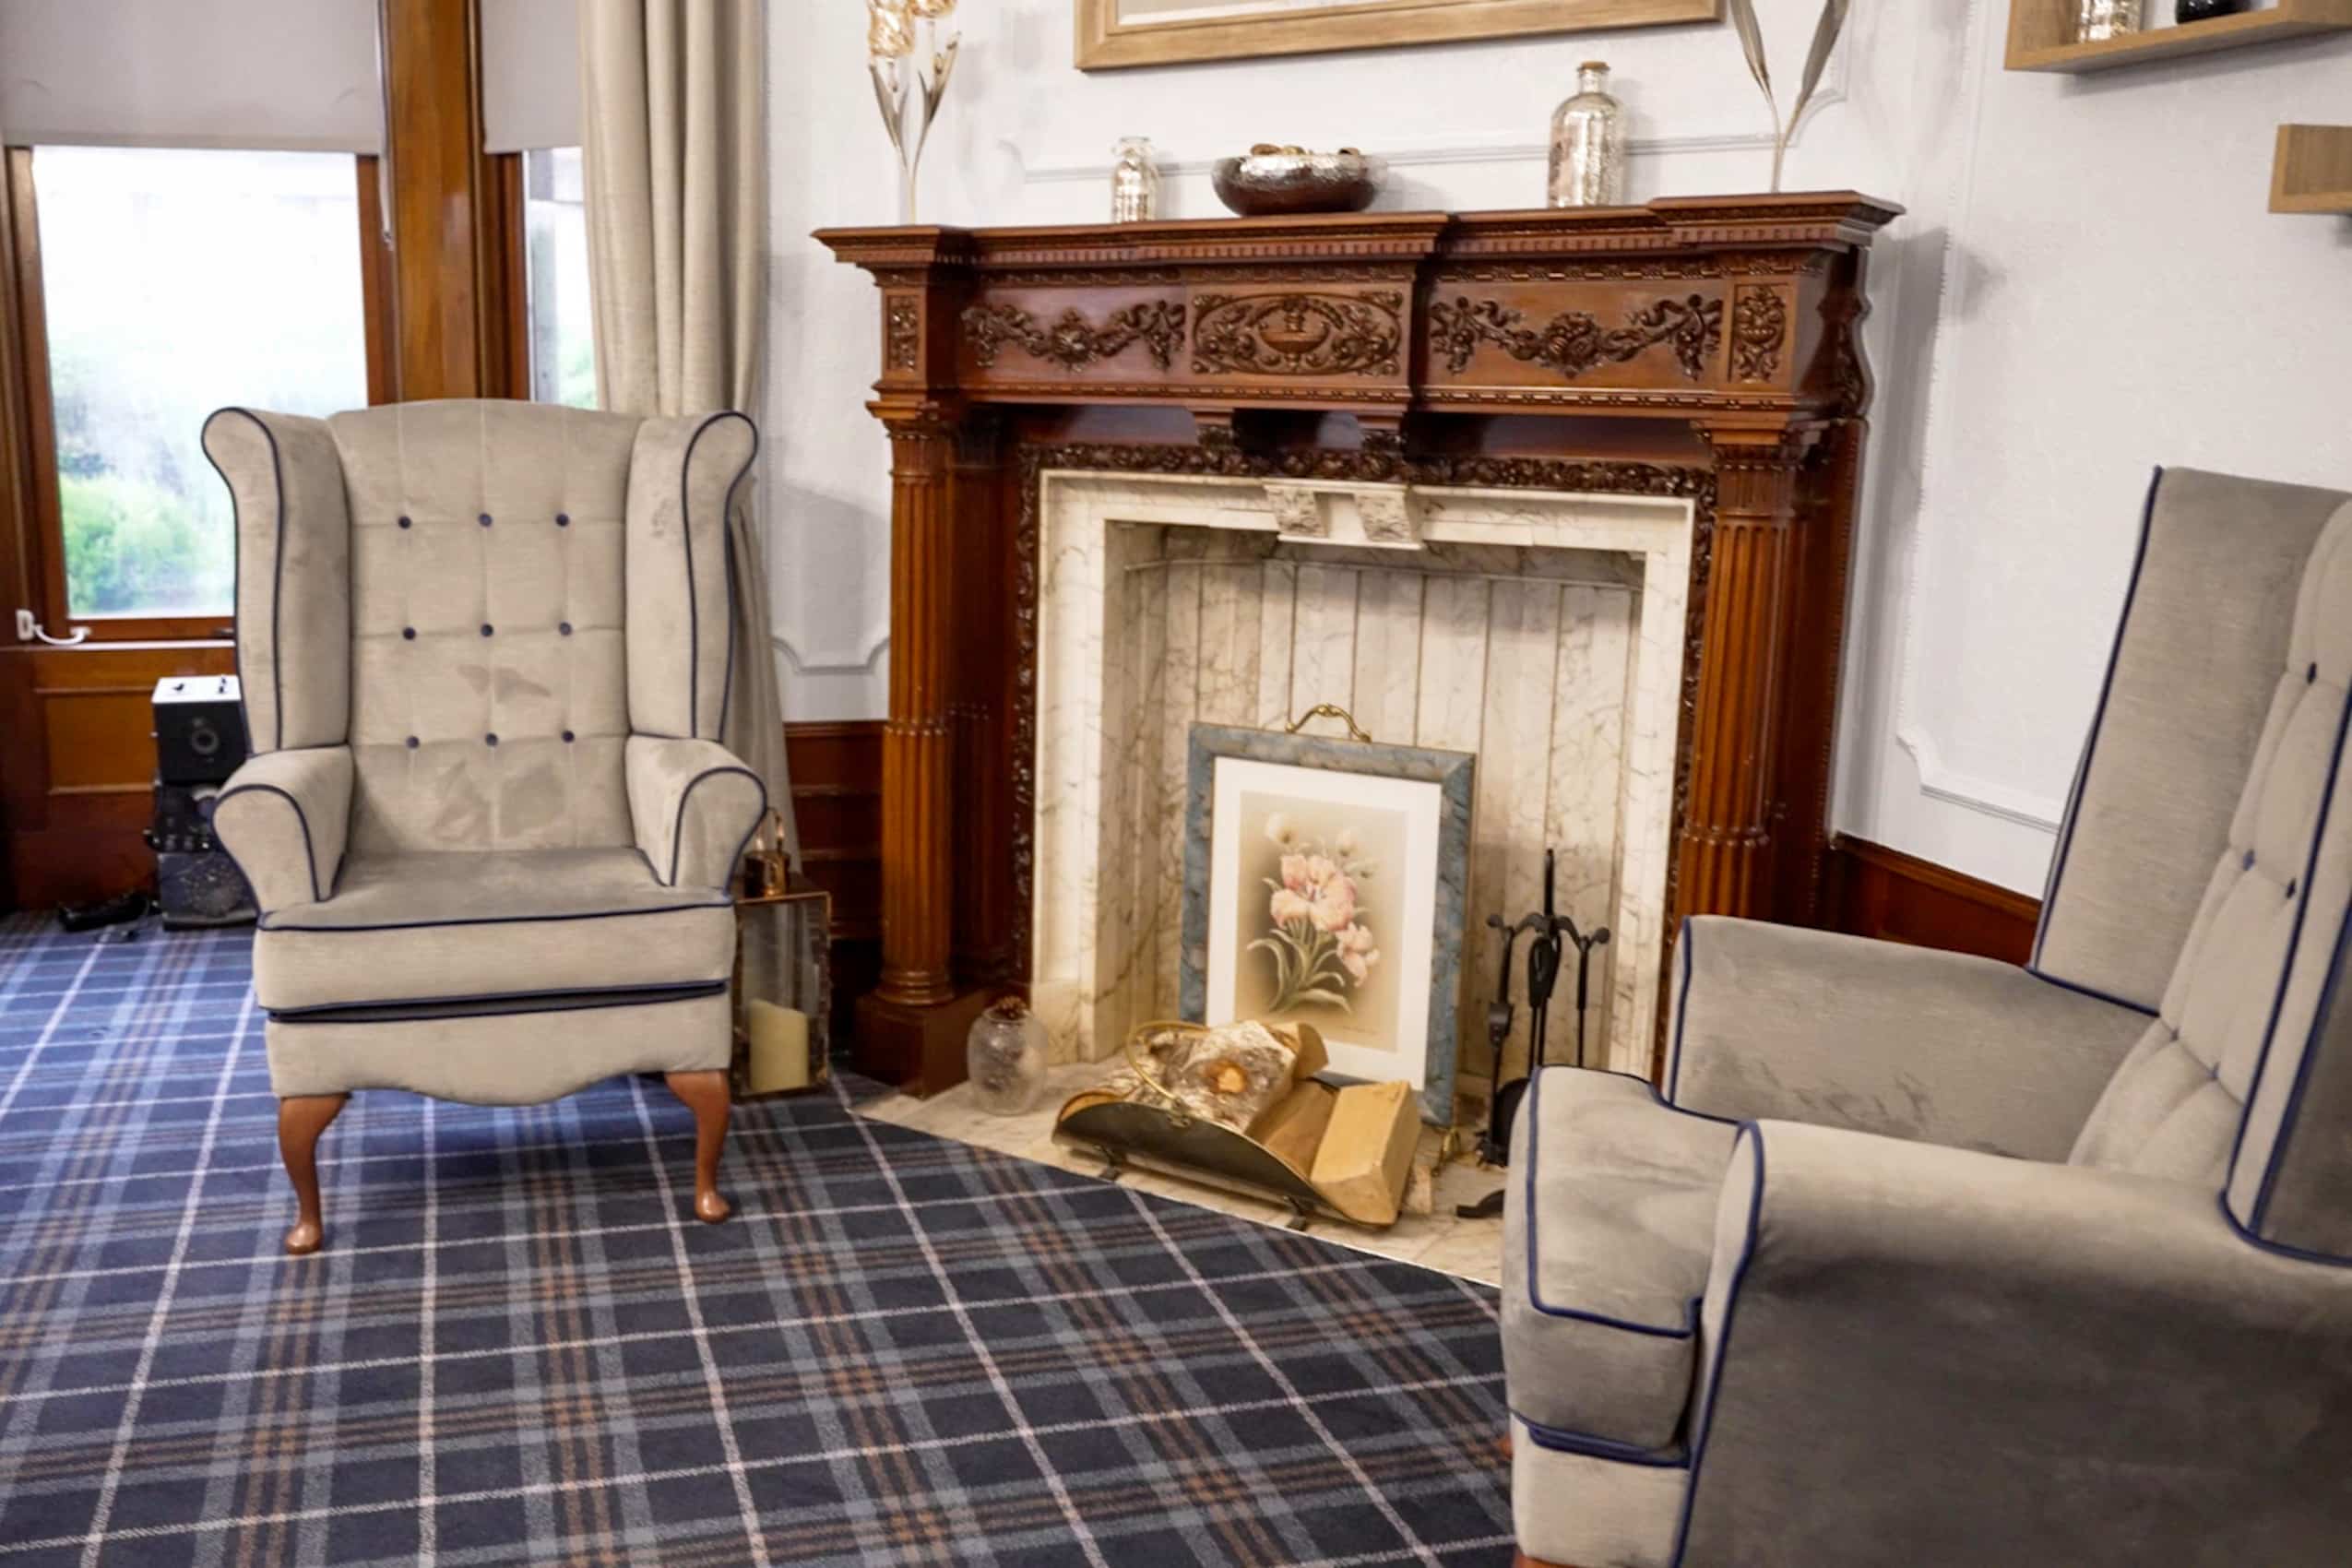 Cranford Care Home Aberdeen, front of house lounge with character fireplace and arm chairs.